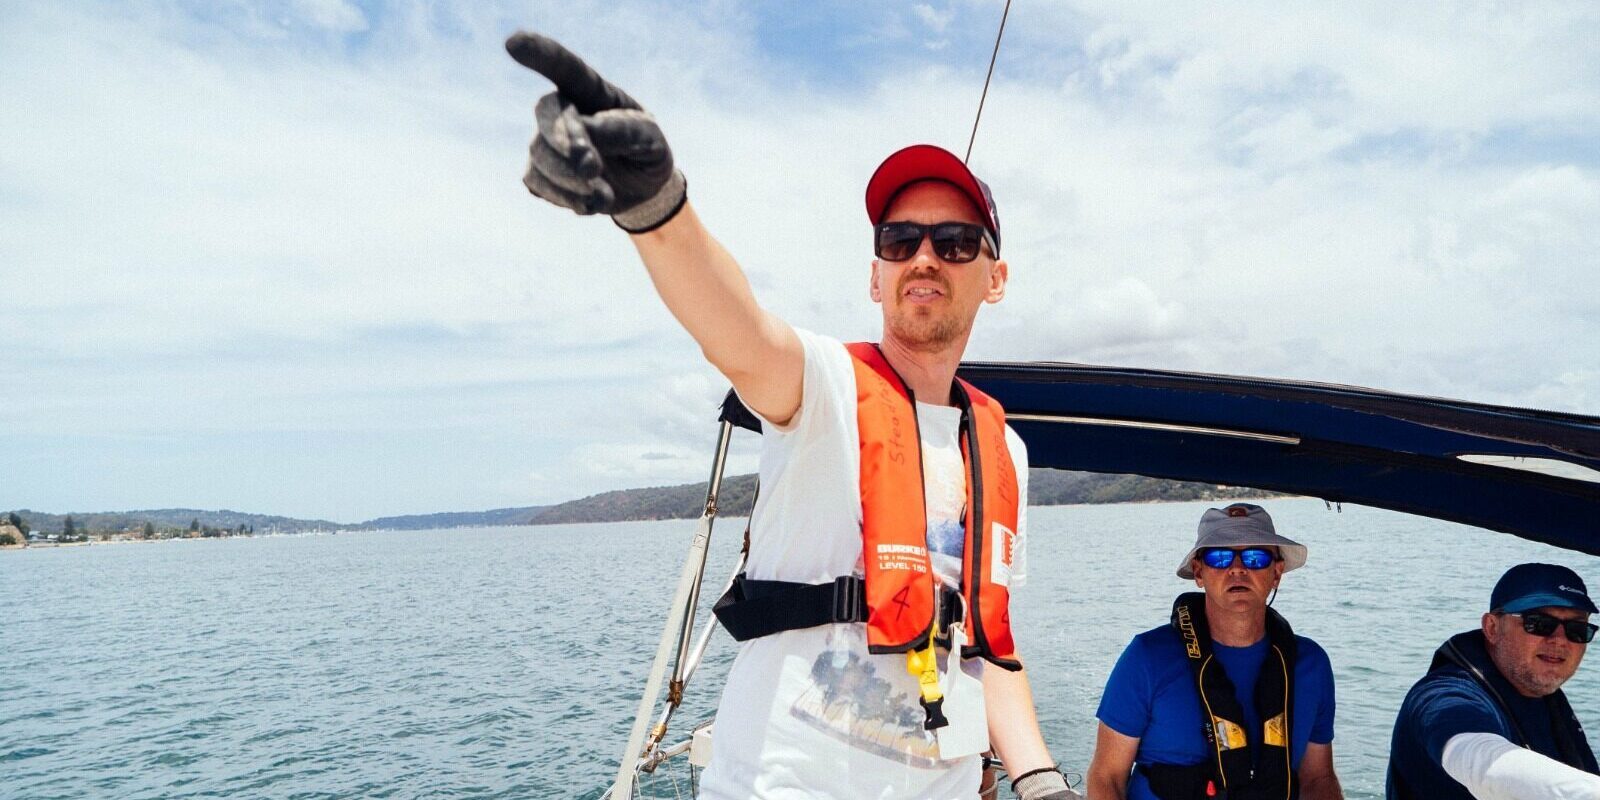 Low cost training ICC learn sailing Melbourne